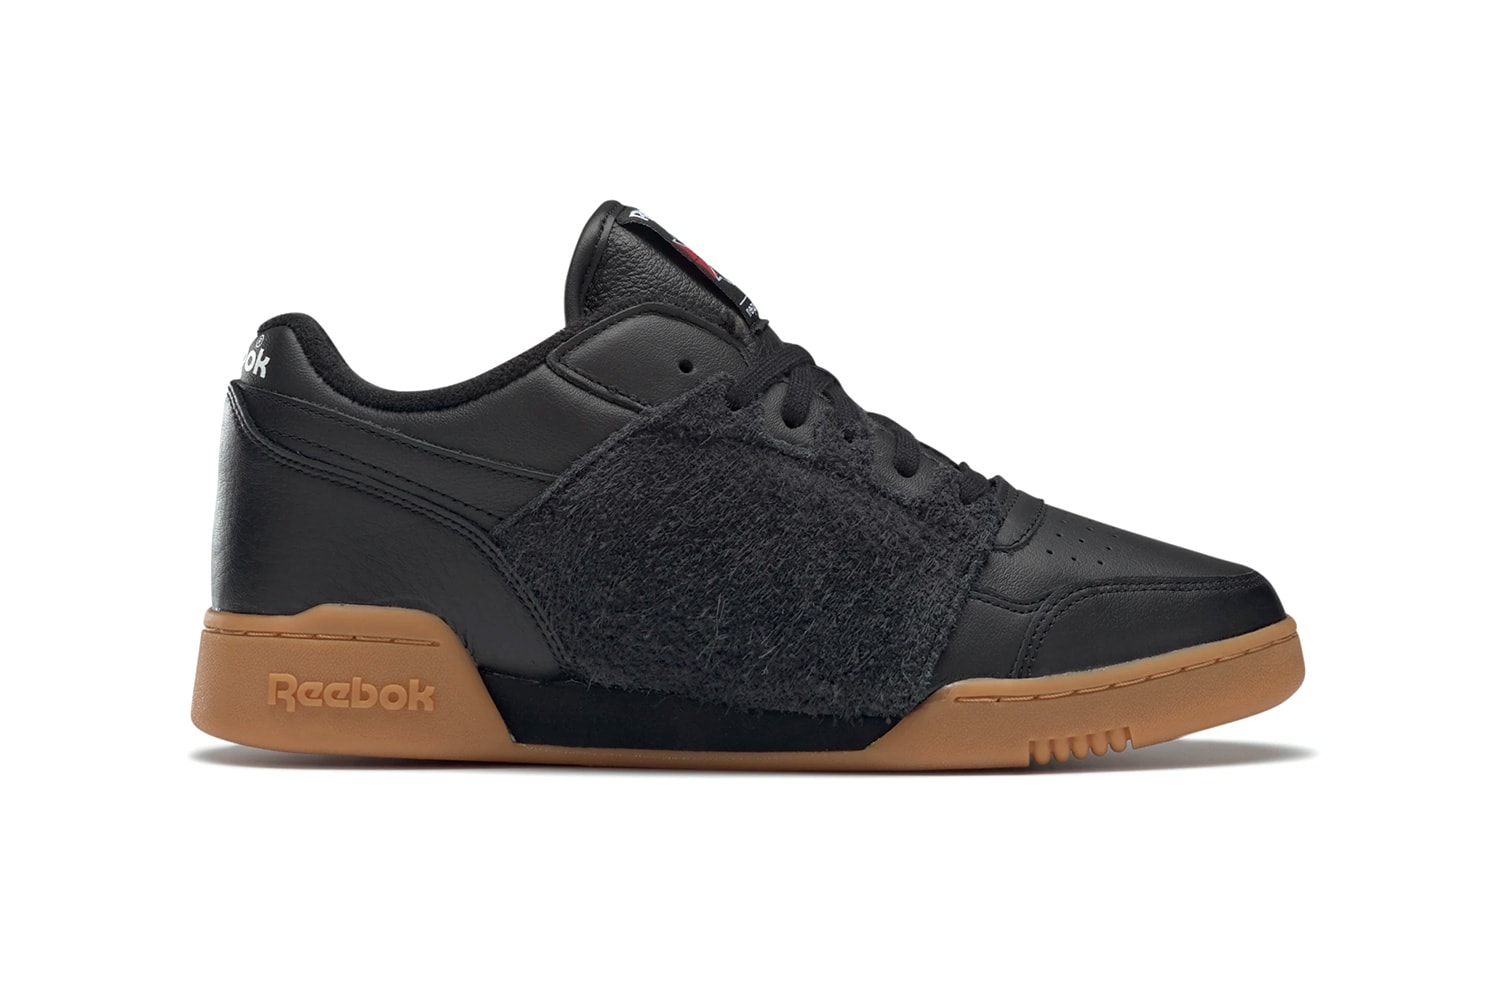 NEPENTHES NY x Reebok Workout Plus "Black/Gum" collaboration sneaker shoe red  FW8461 eva cushion sole suede crossgrain tumbled leather  price drop date release info 